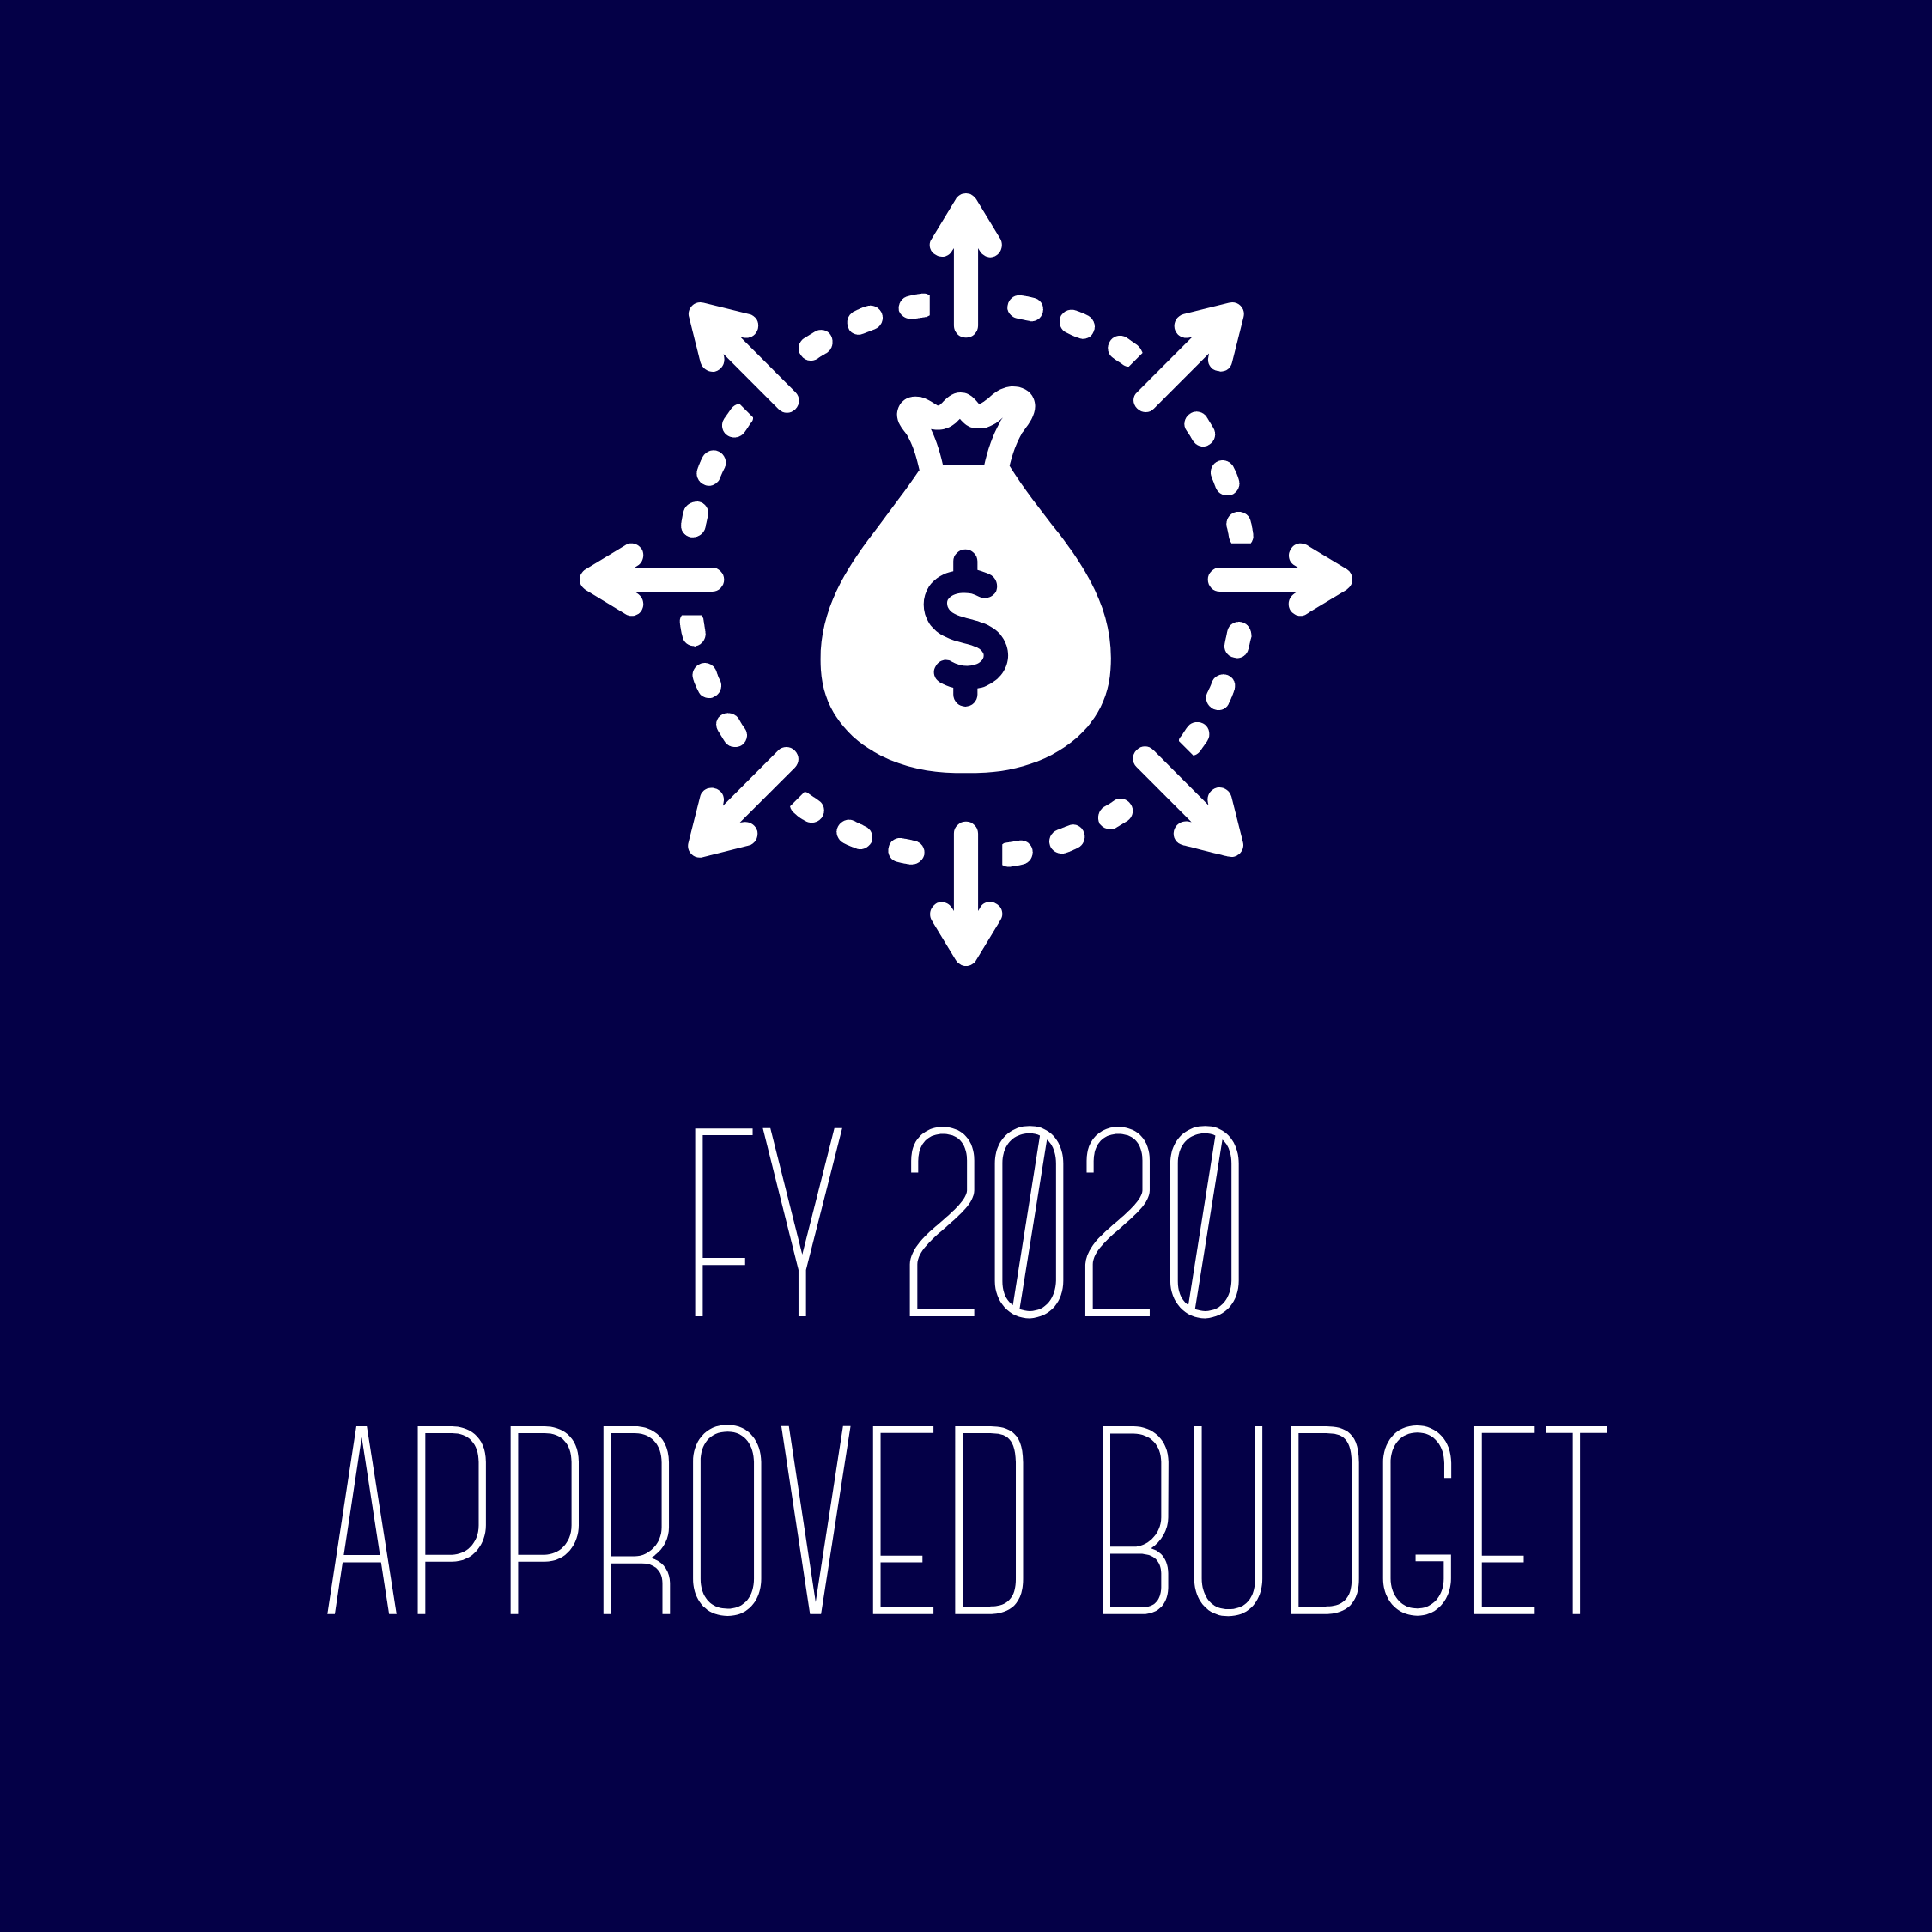 FY 2020 Approved Budget